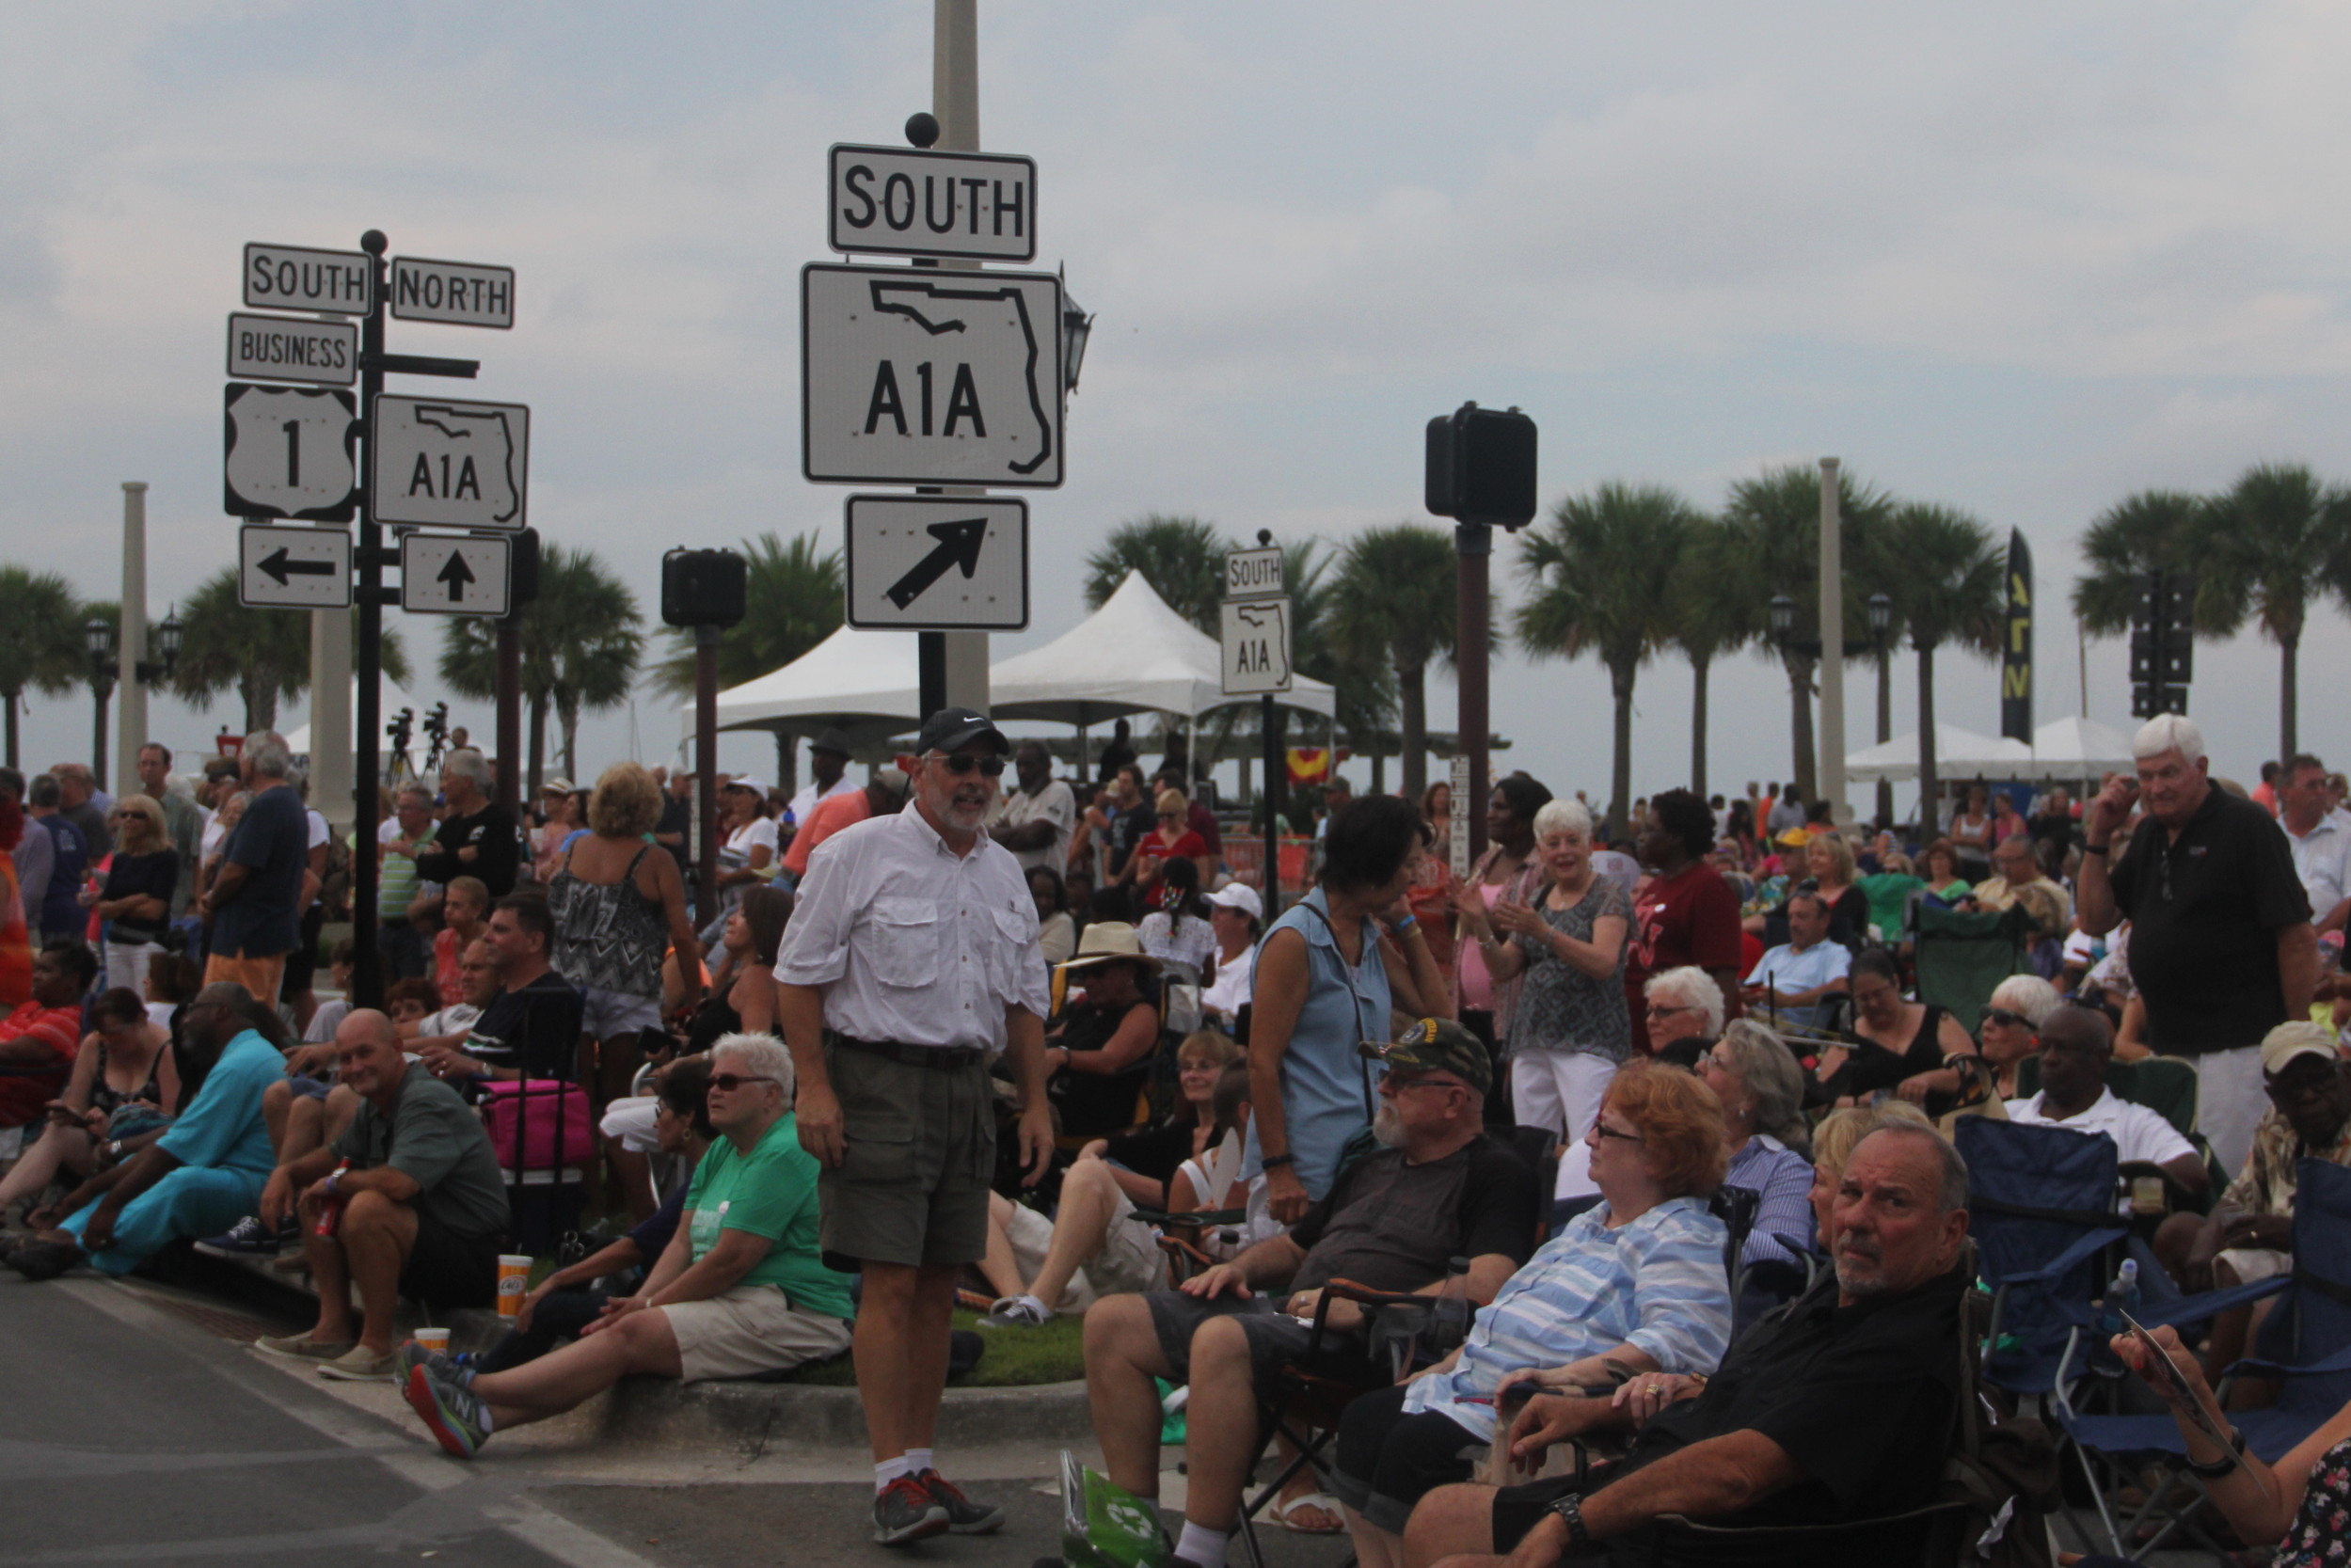 The bulk of the crowds for St. Augustine's 450th gathered around the main stage near the Bridge of Lions.